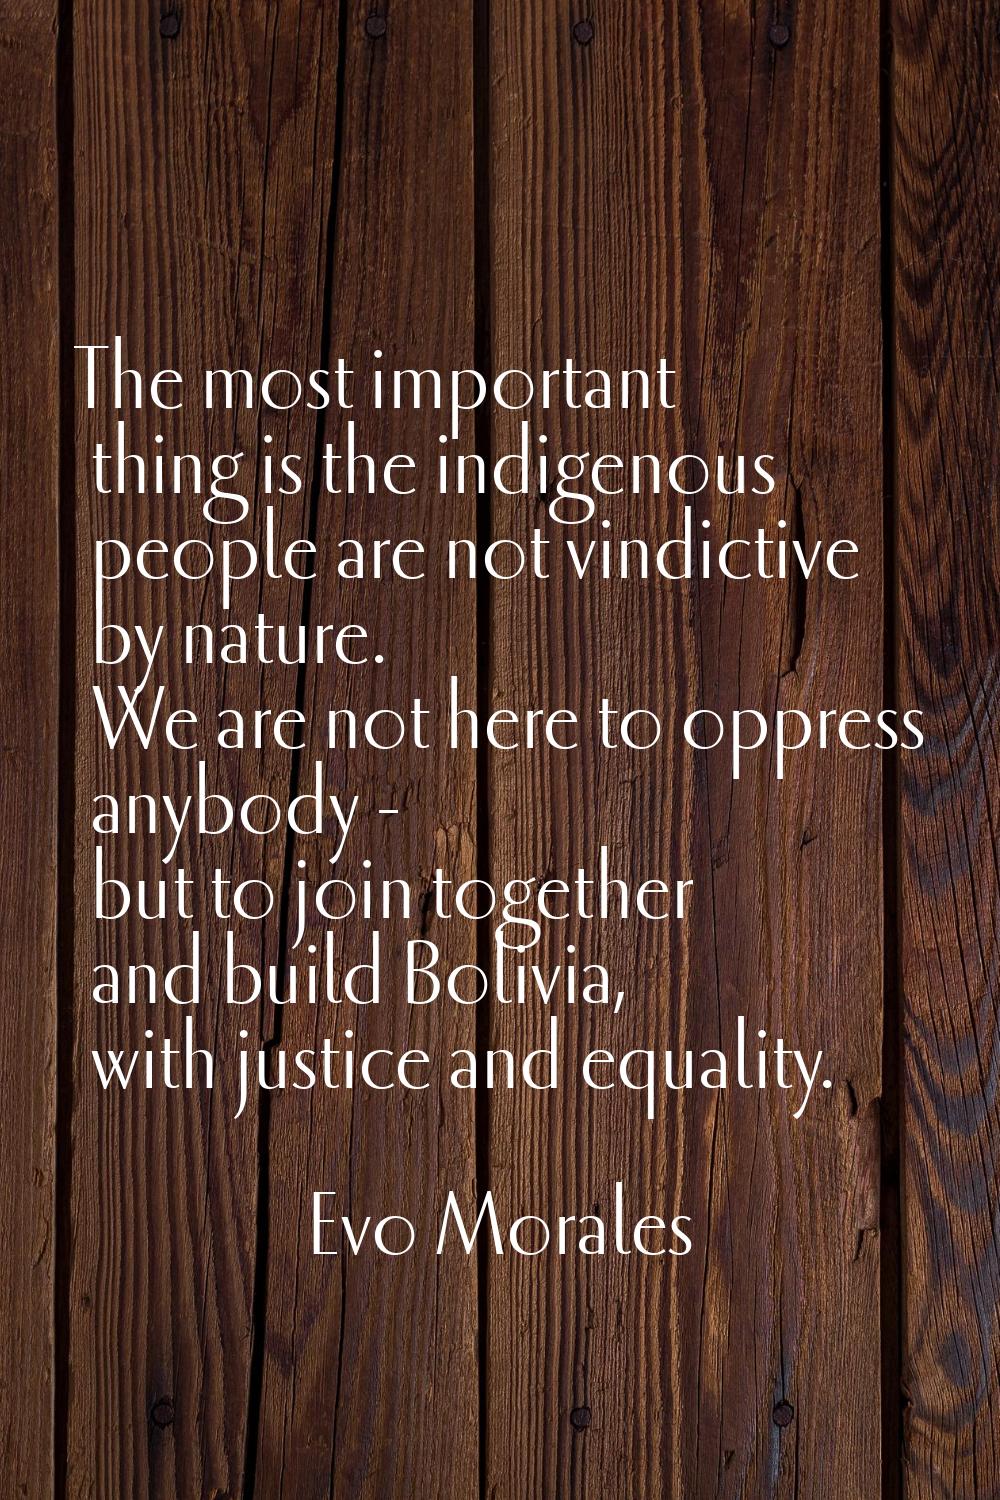 The most important thing is the indigenous people are not vindictive by nature. We are not here to 